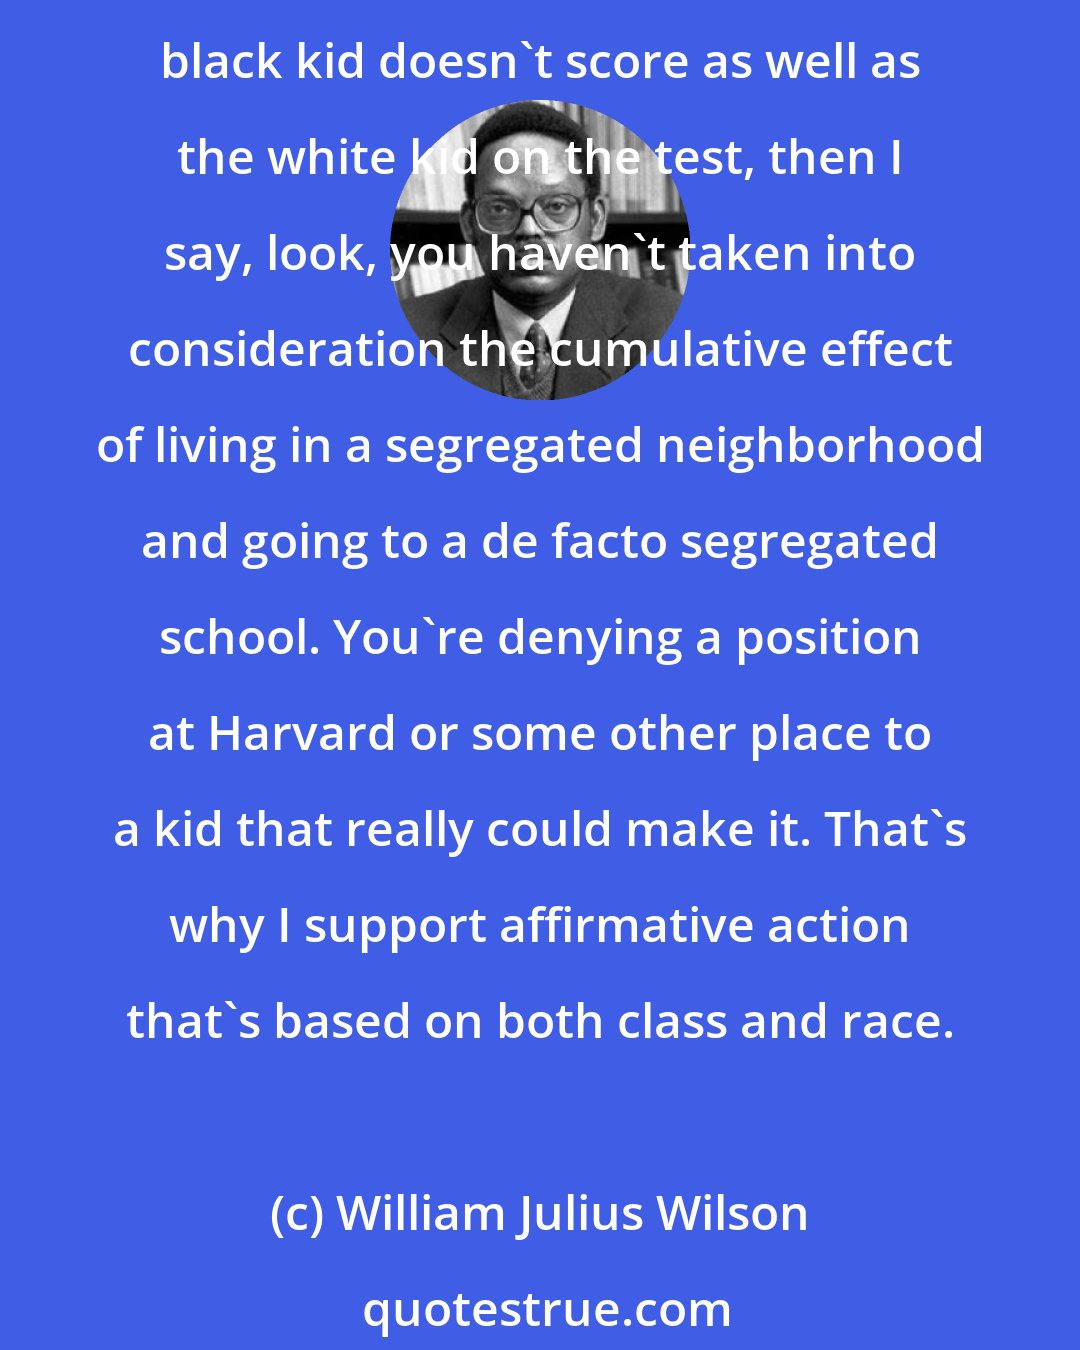 William Julius Wilson: If you're going to compare a middle-income black kid with a middle- income white kid, and, say, you control for family background, family education, and family income, and if this middle-income black kid doesn't score as well as the white kid on the test, then I say, look, you haven't taken into consideration the cumulative effect of living in a segregated neighborhood and going to a de facto segregated school. You're denying a position at Harvard or some other place to a kid that really could make it. That's why I support affirmative action that's based on both class and race.